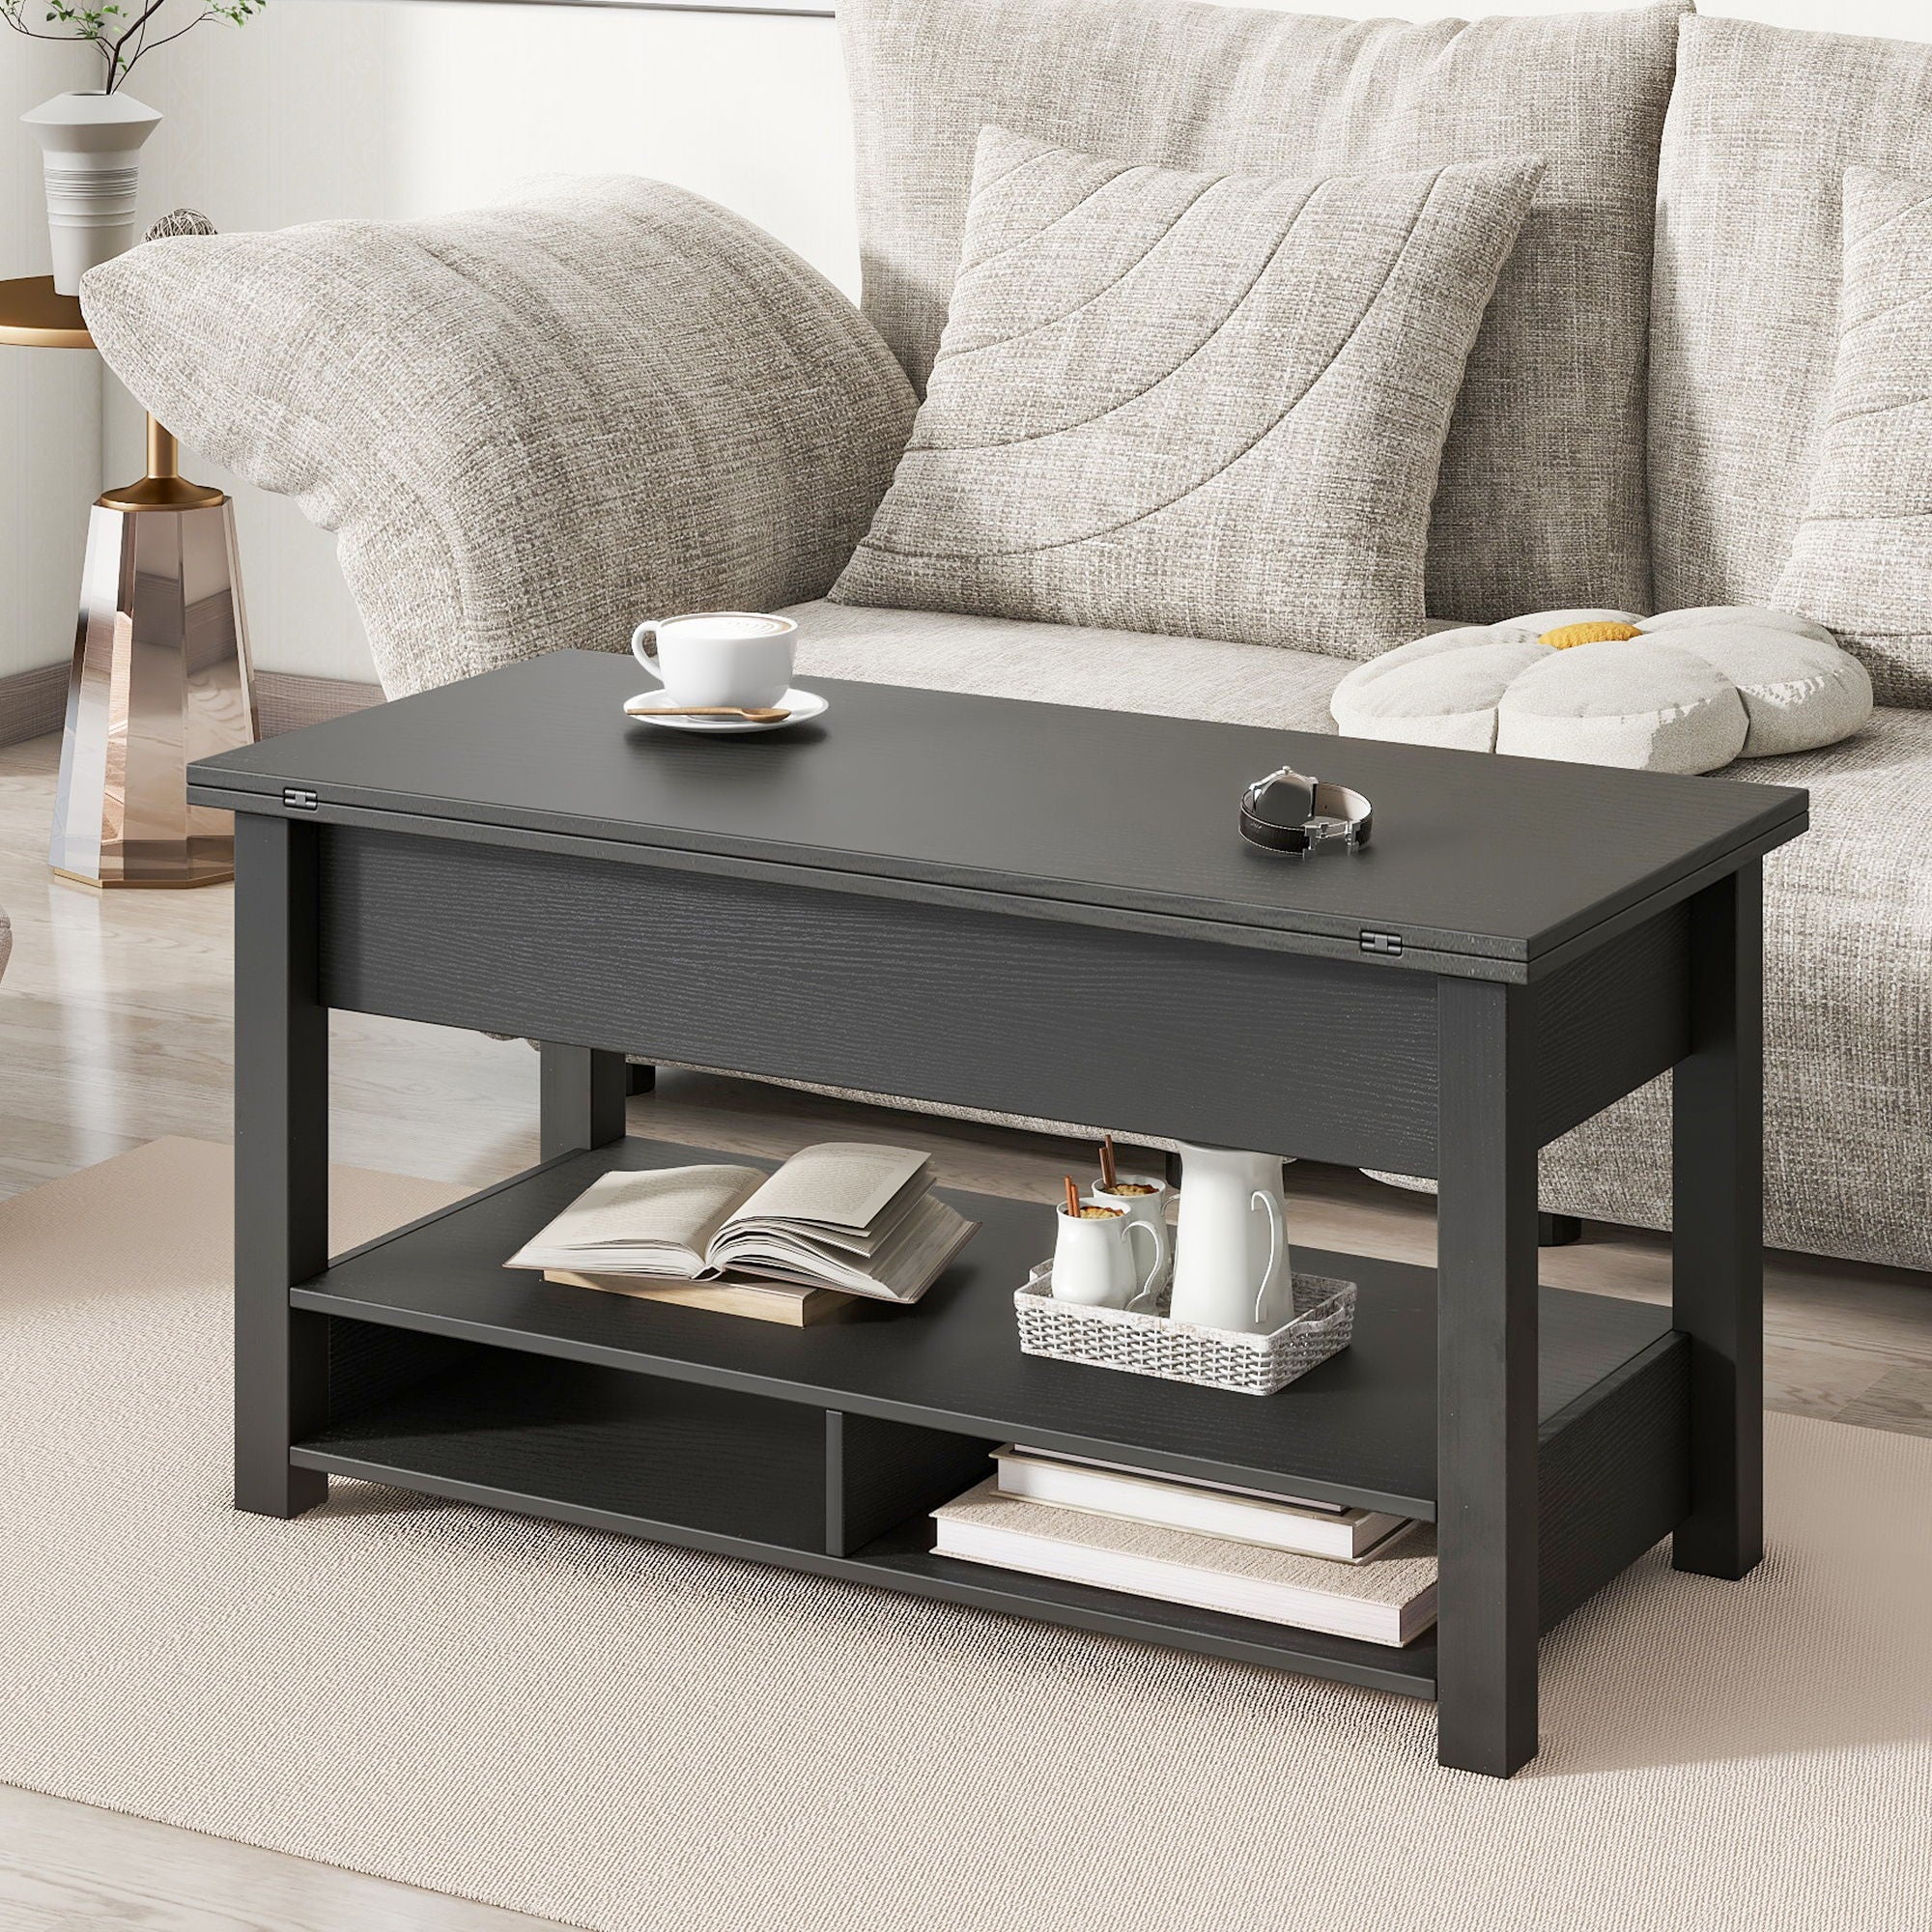 On-Trend Lift Top Coffee Table, Multi-Functional Coffee Table With Open Shelves, Modern Lift Tabletop Dining Table For Living Room, Home Office, Black